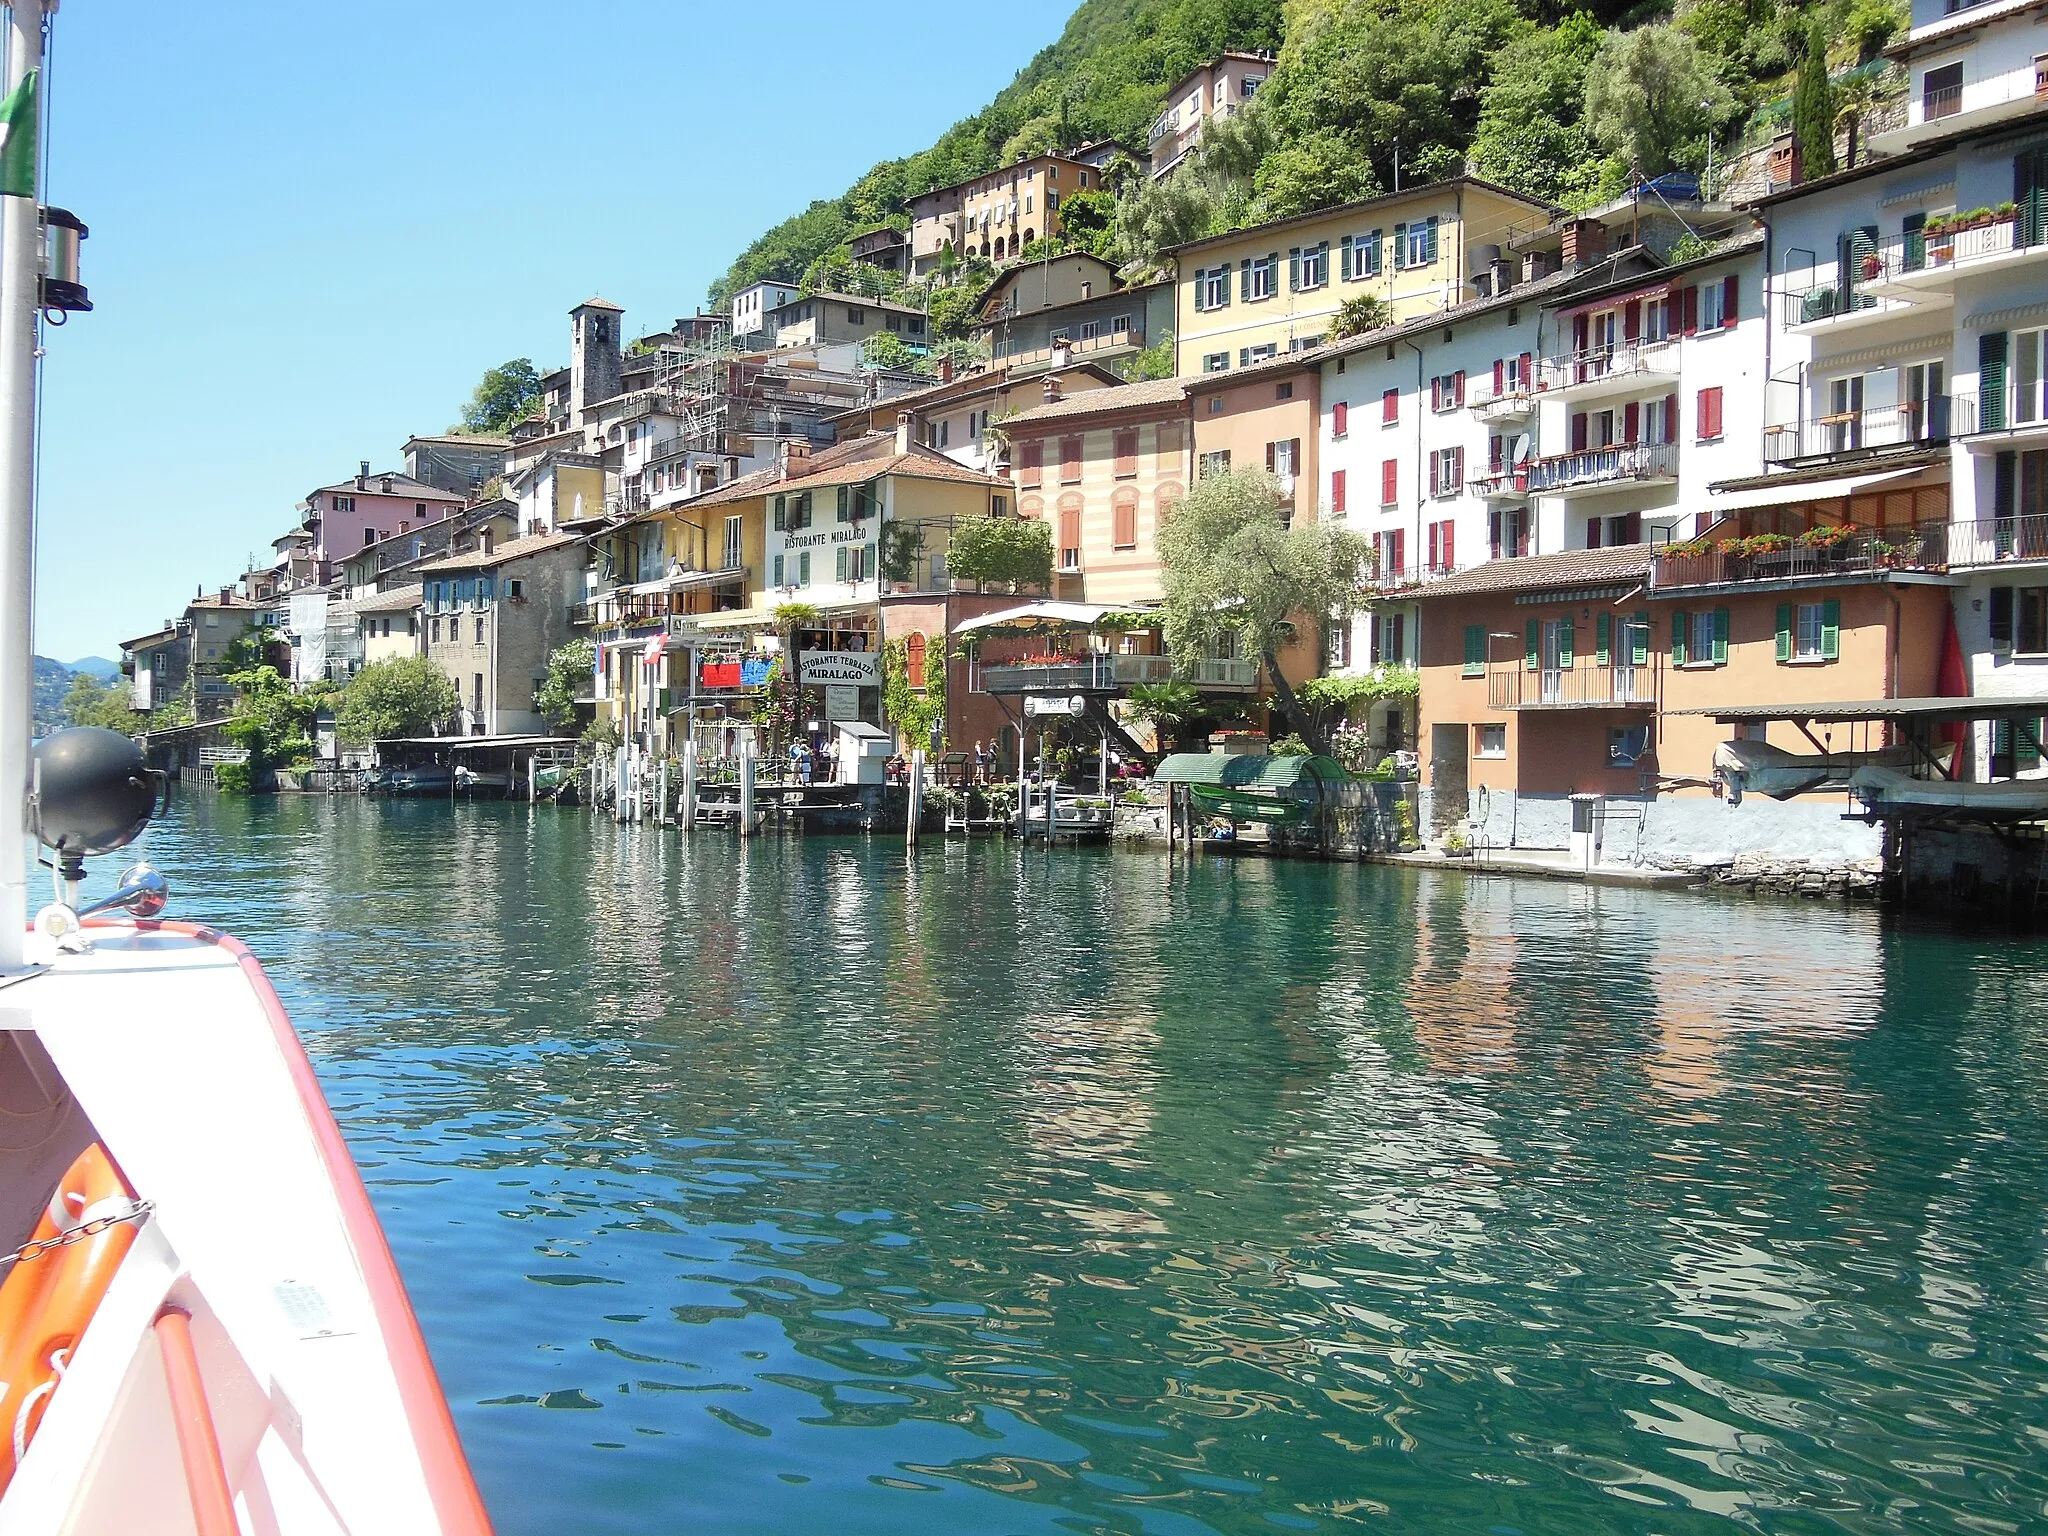 Photo showing: The quayside at the village of Gandria, on Lake Lugano in Switzerland, as seen from an approaching vessel of the Società Navigazione del Lago di Lugano. For more information, see the Wikipedia articles Gandria and Società Navigazione del Lago di Lugano.